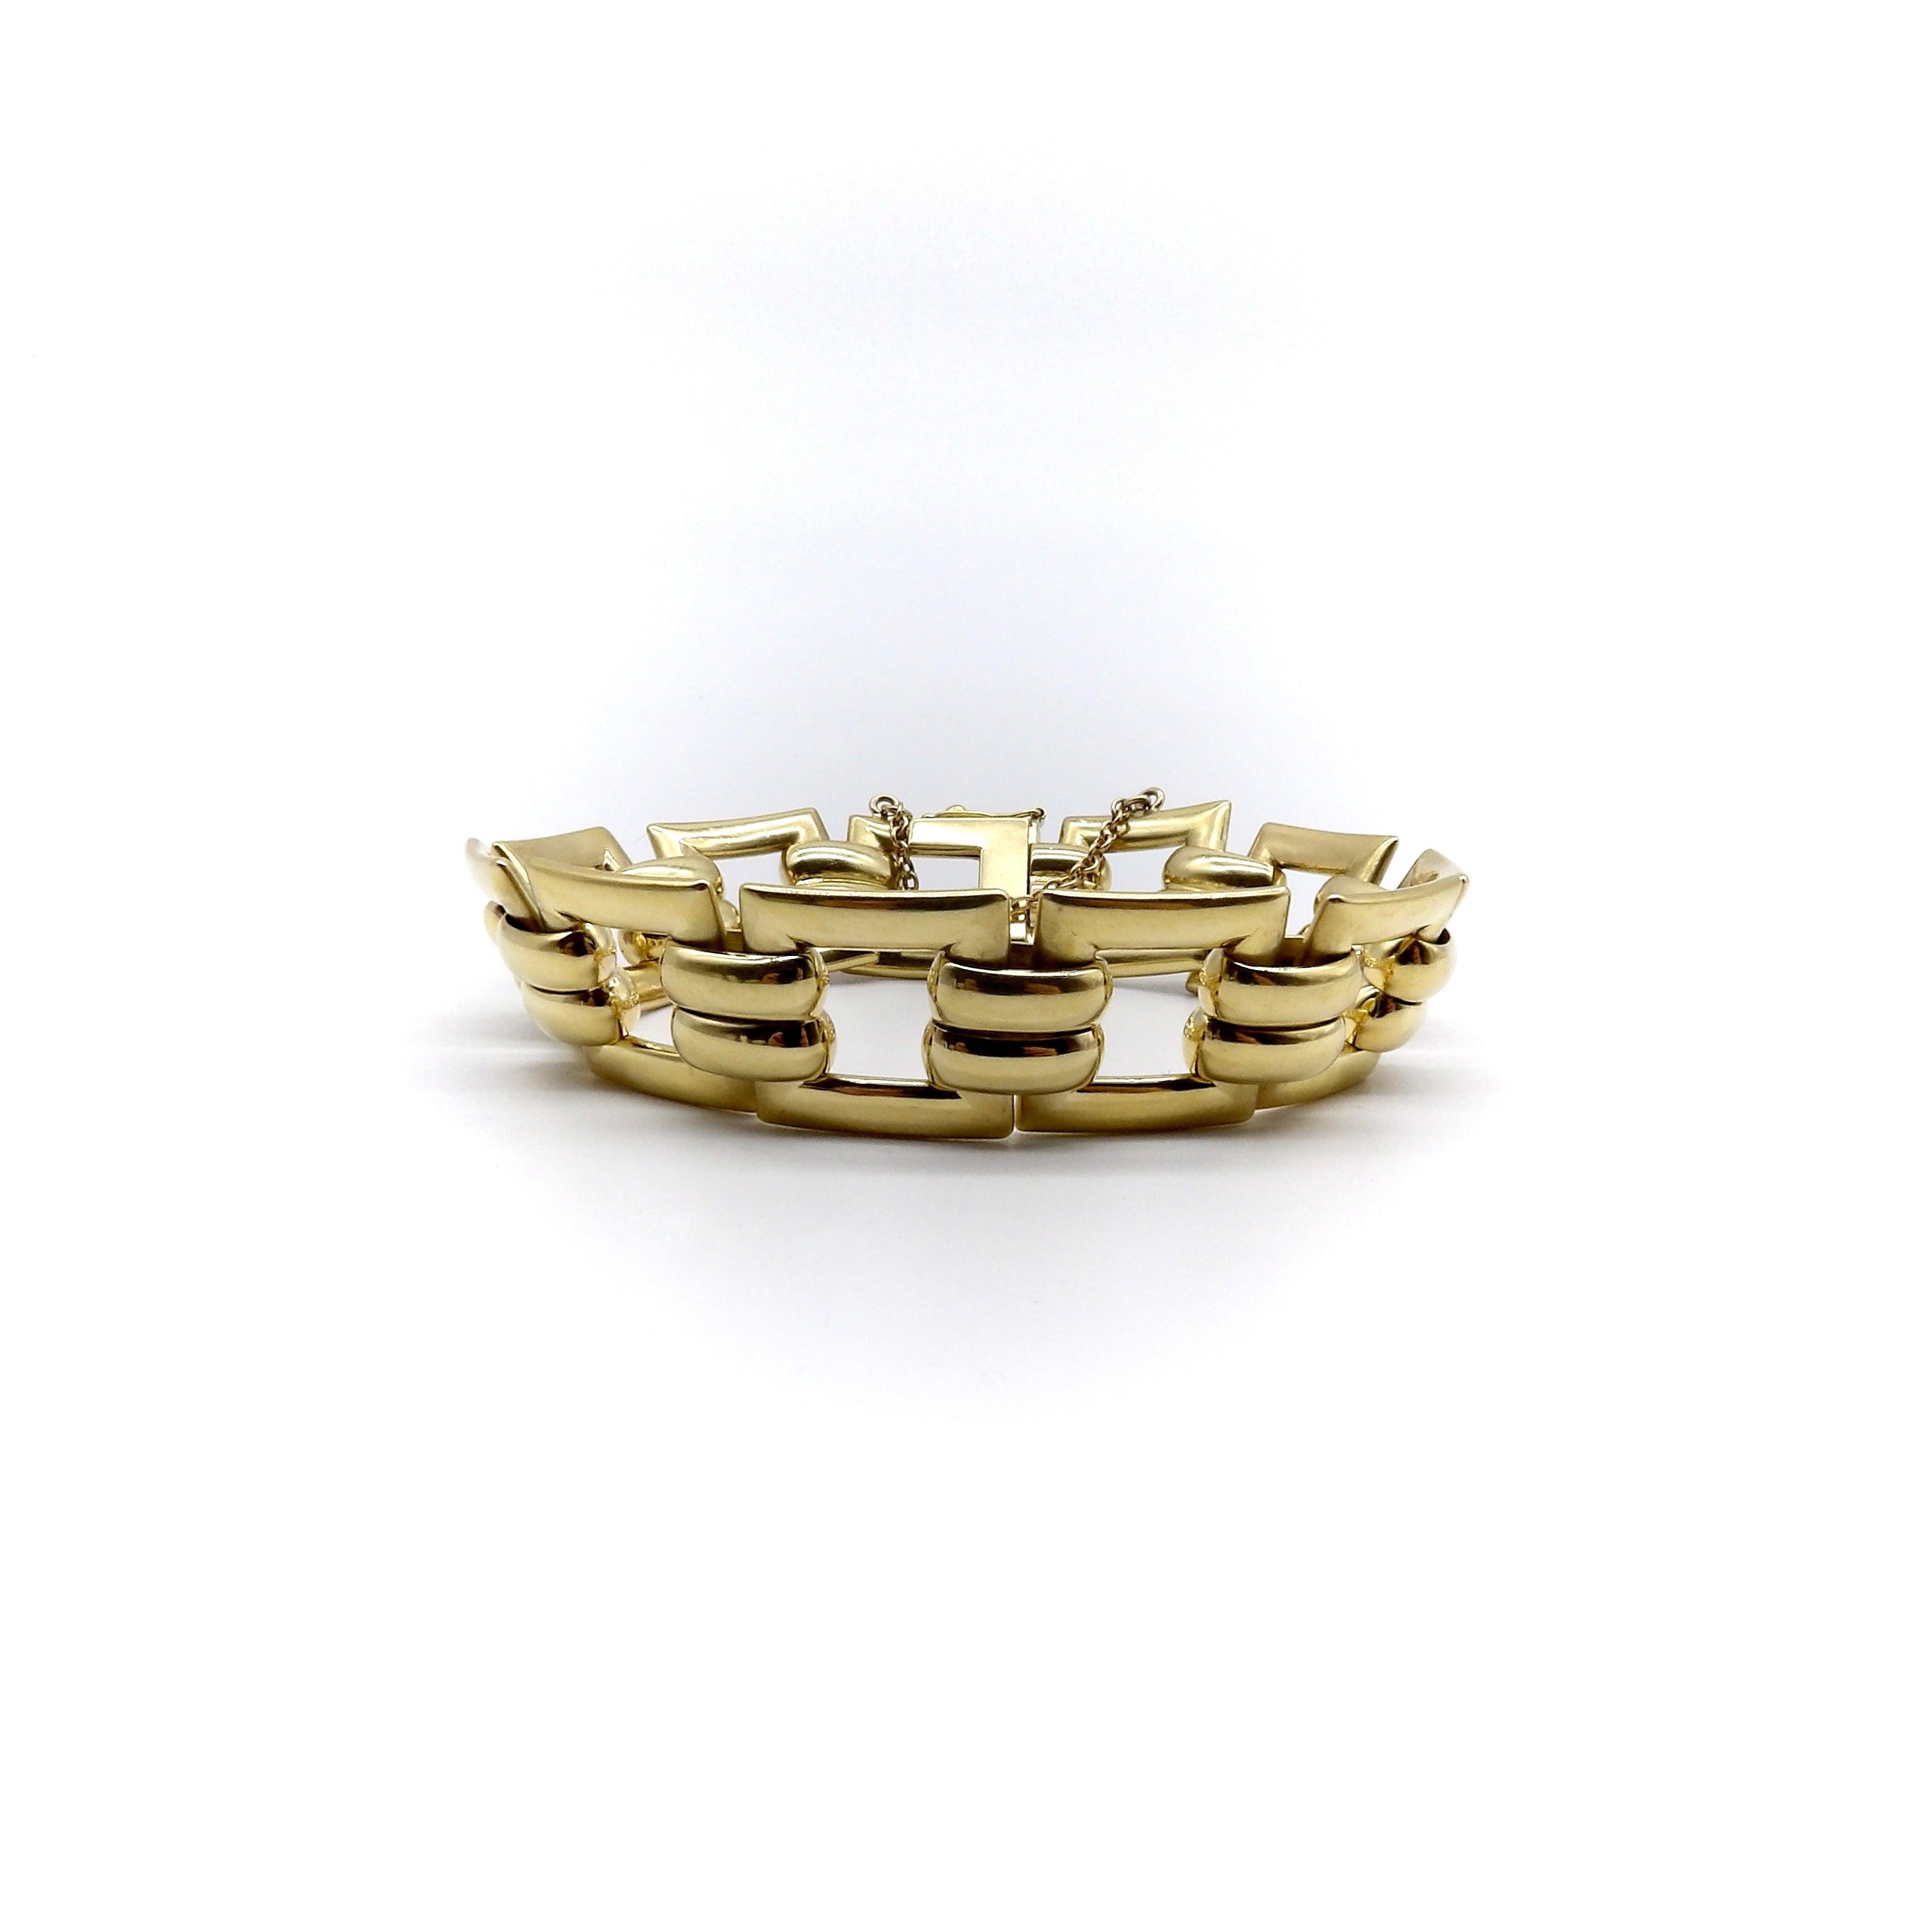 This mid-century French bracelet alternates between a square link and ribbed middle section. Both links and ribs are dimensional, as they are slightly convex, allowing them to lay nicely against the wrist. They are sculptural in nature, and the